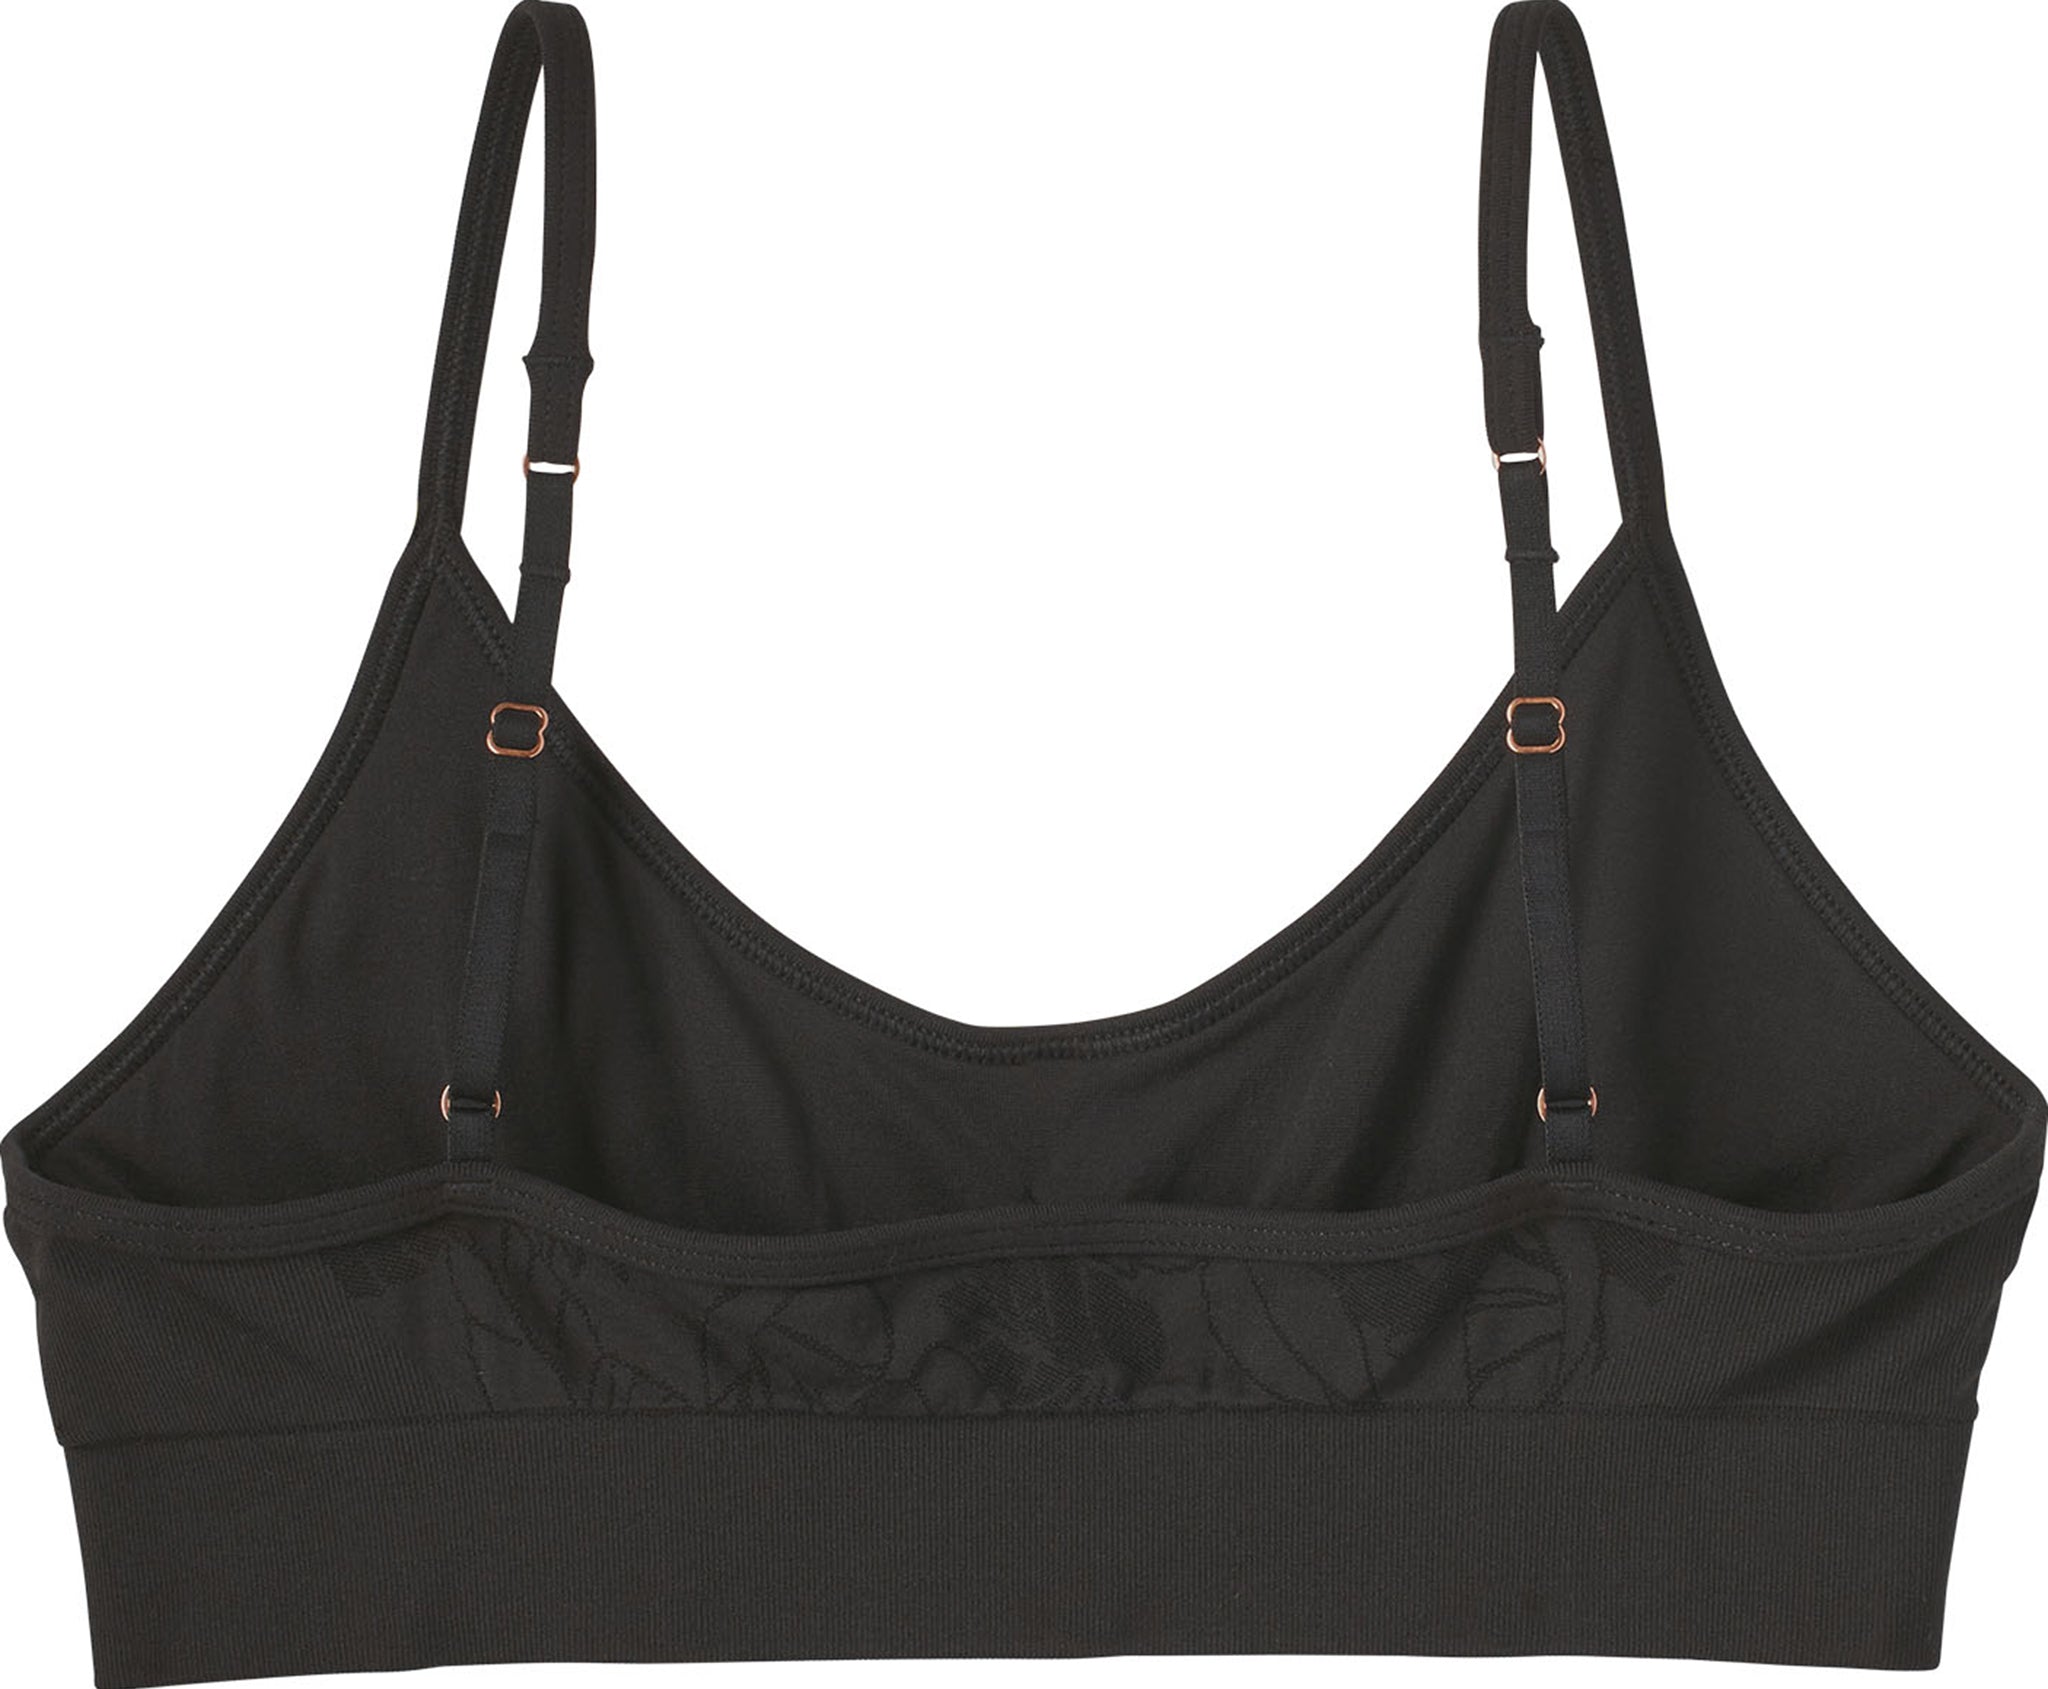 Patagonia Barely Everyday Bra - Women's for Sale, Reviews, Deals and Guides